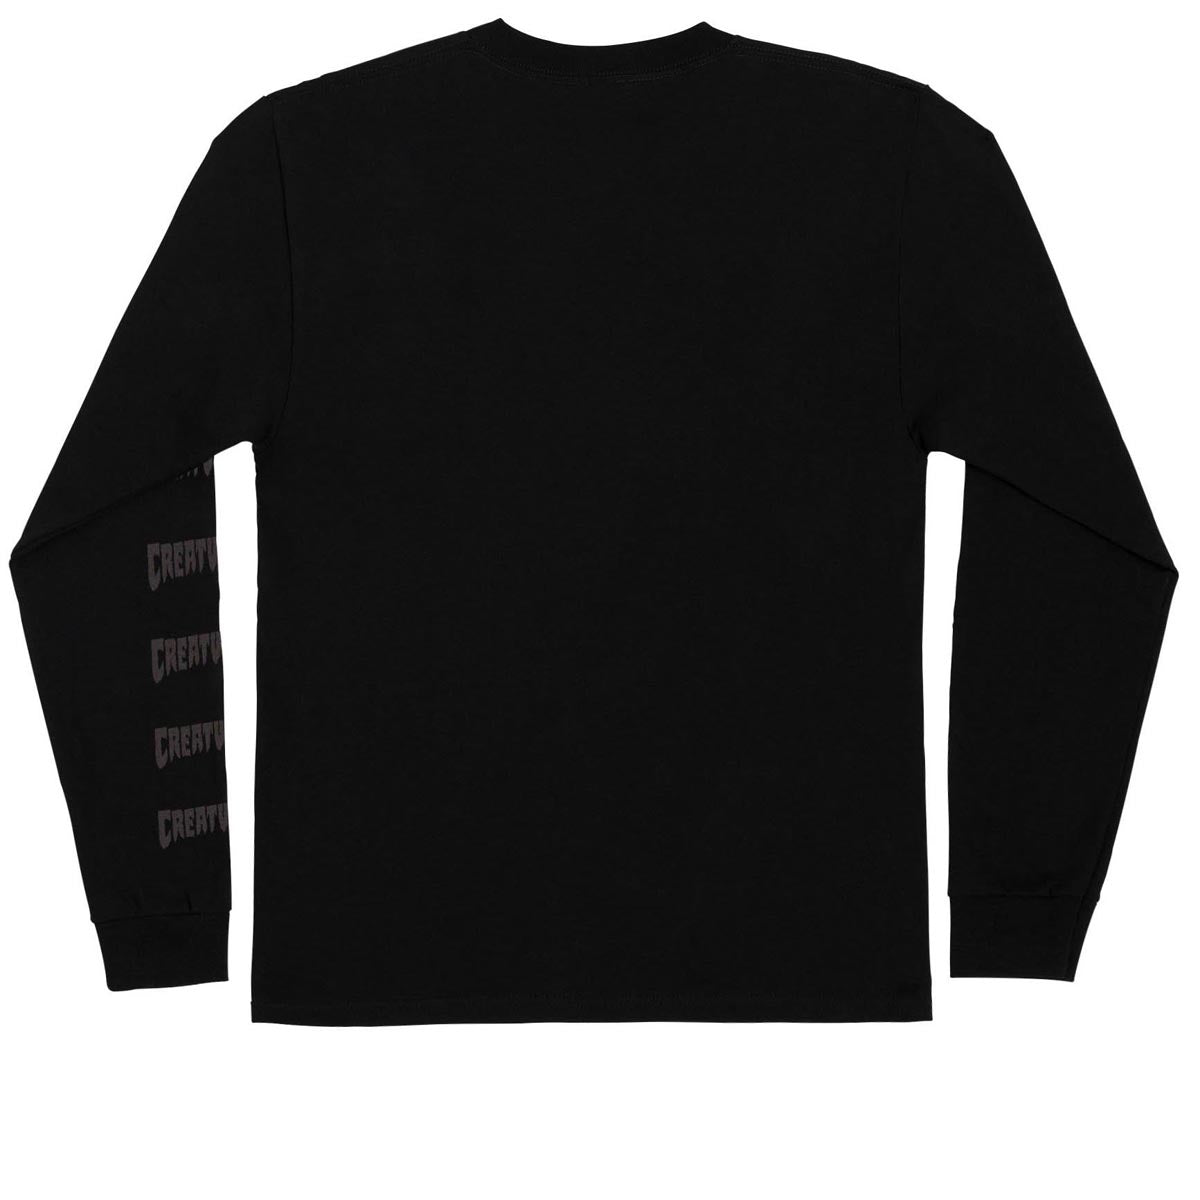 Creature Fiend Club Relic Front Long Sleeve T-Shirt - Black image 2